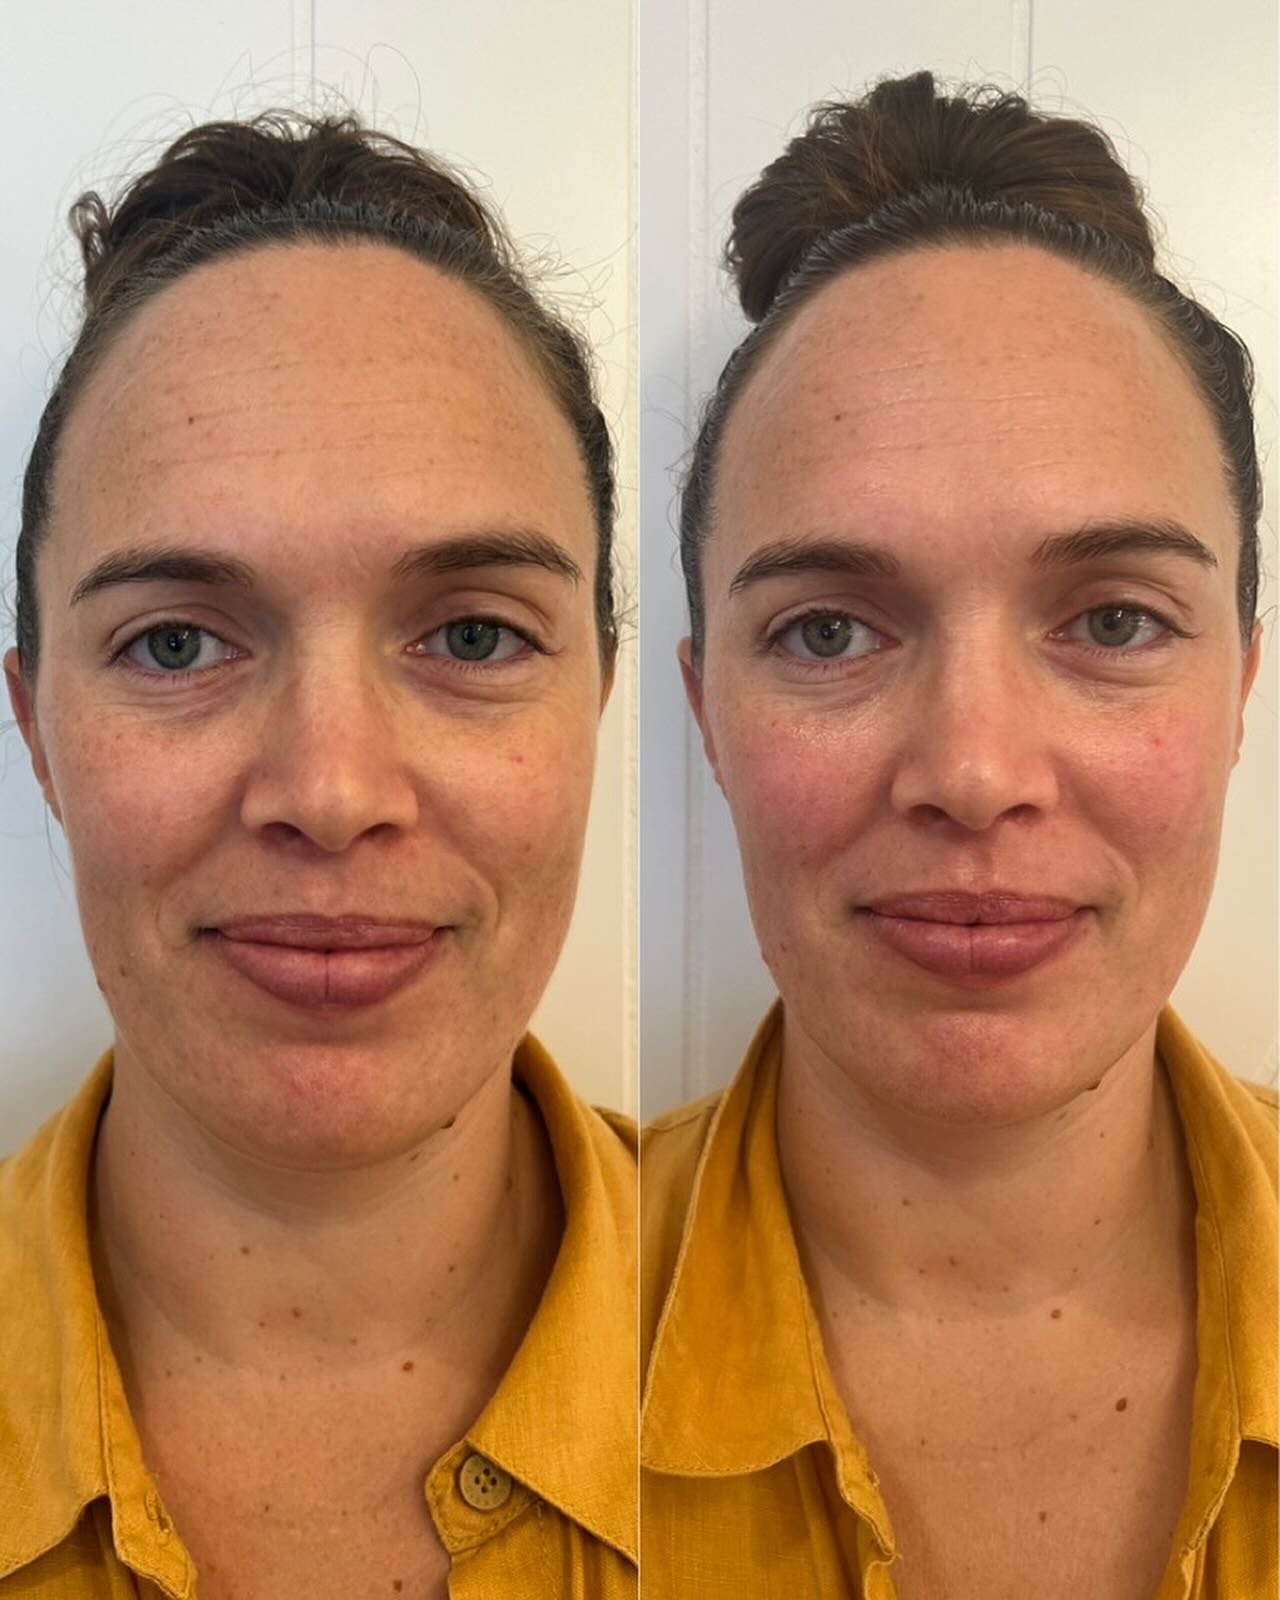 Some of the before &amp; afters of the face sculpting massage I&rsquo;ve been working on to share with you. The results are mind blowing 🤯 

I&rsquo;ve been learning the Neolifting Technique which helps to:
▫️ relax facial muscles and improve muscle